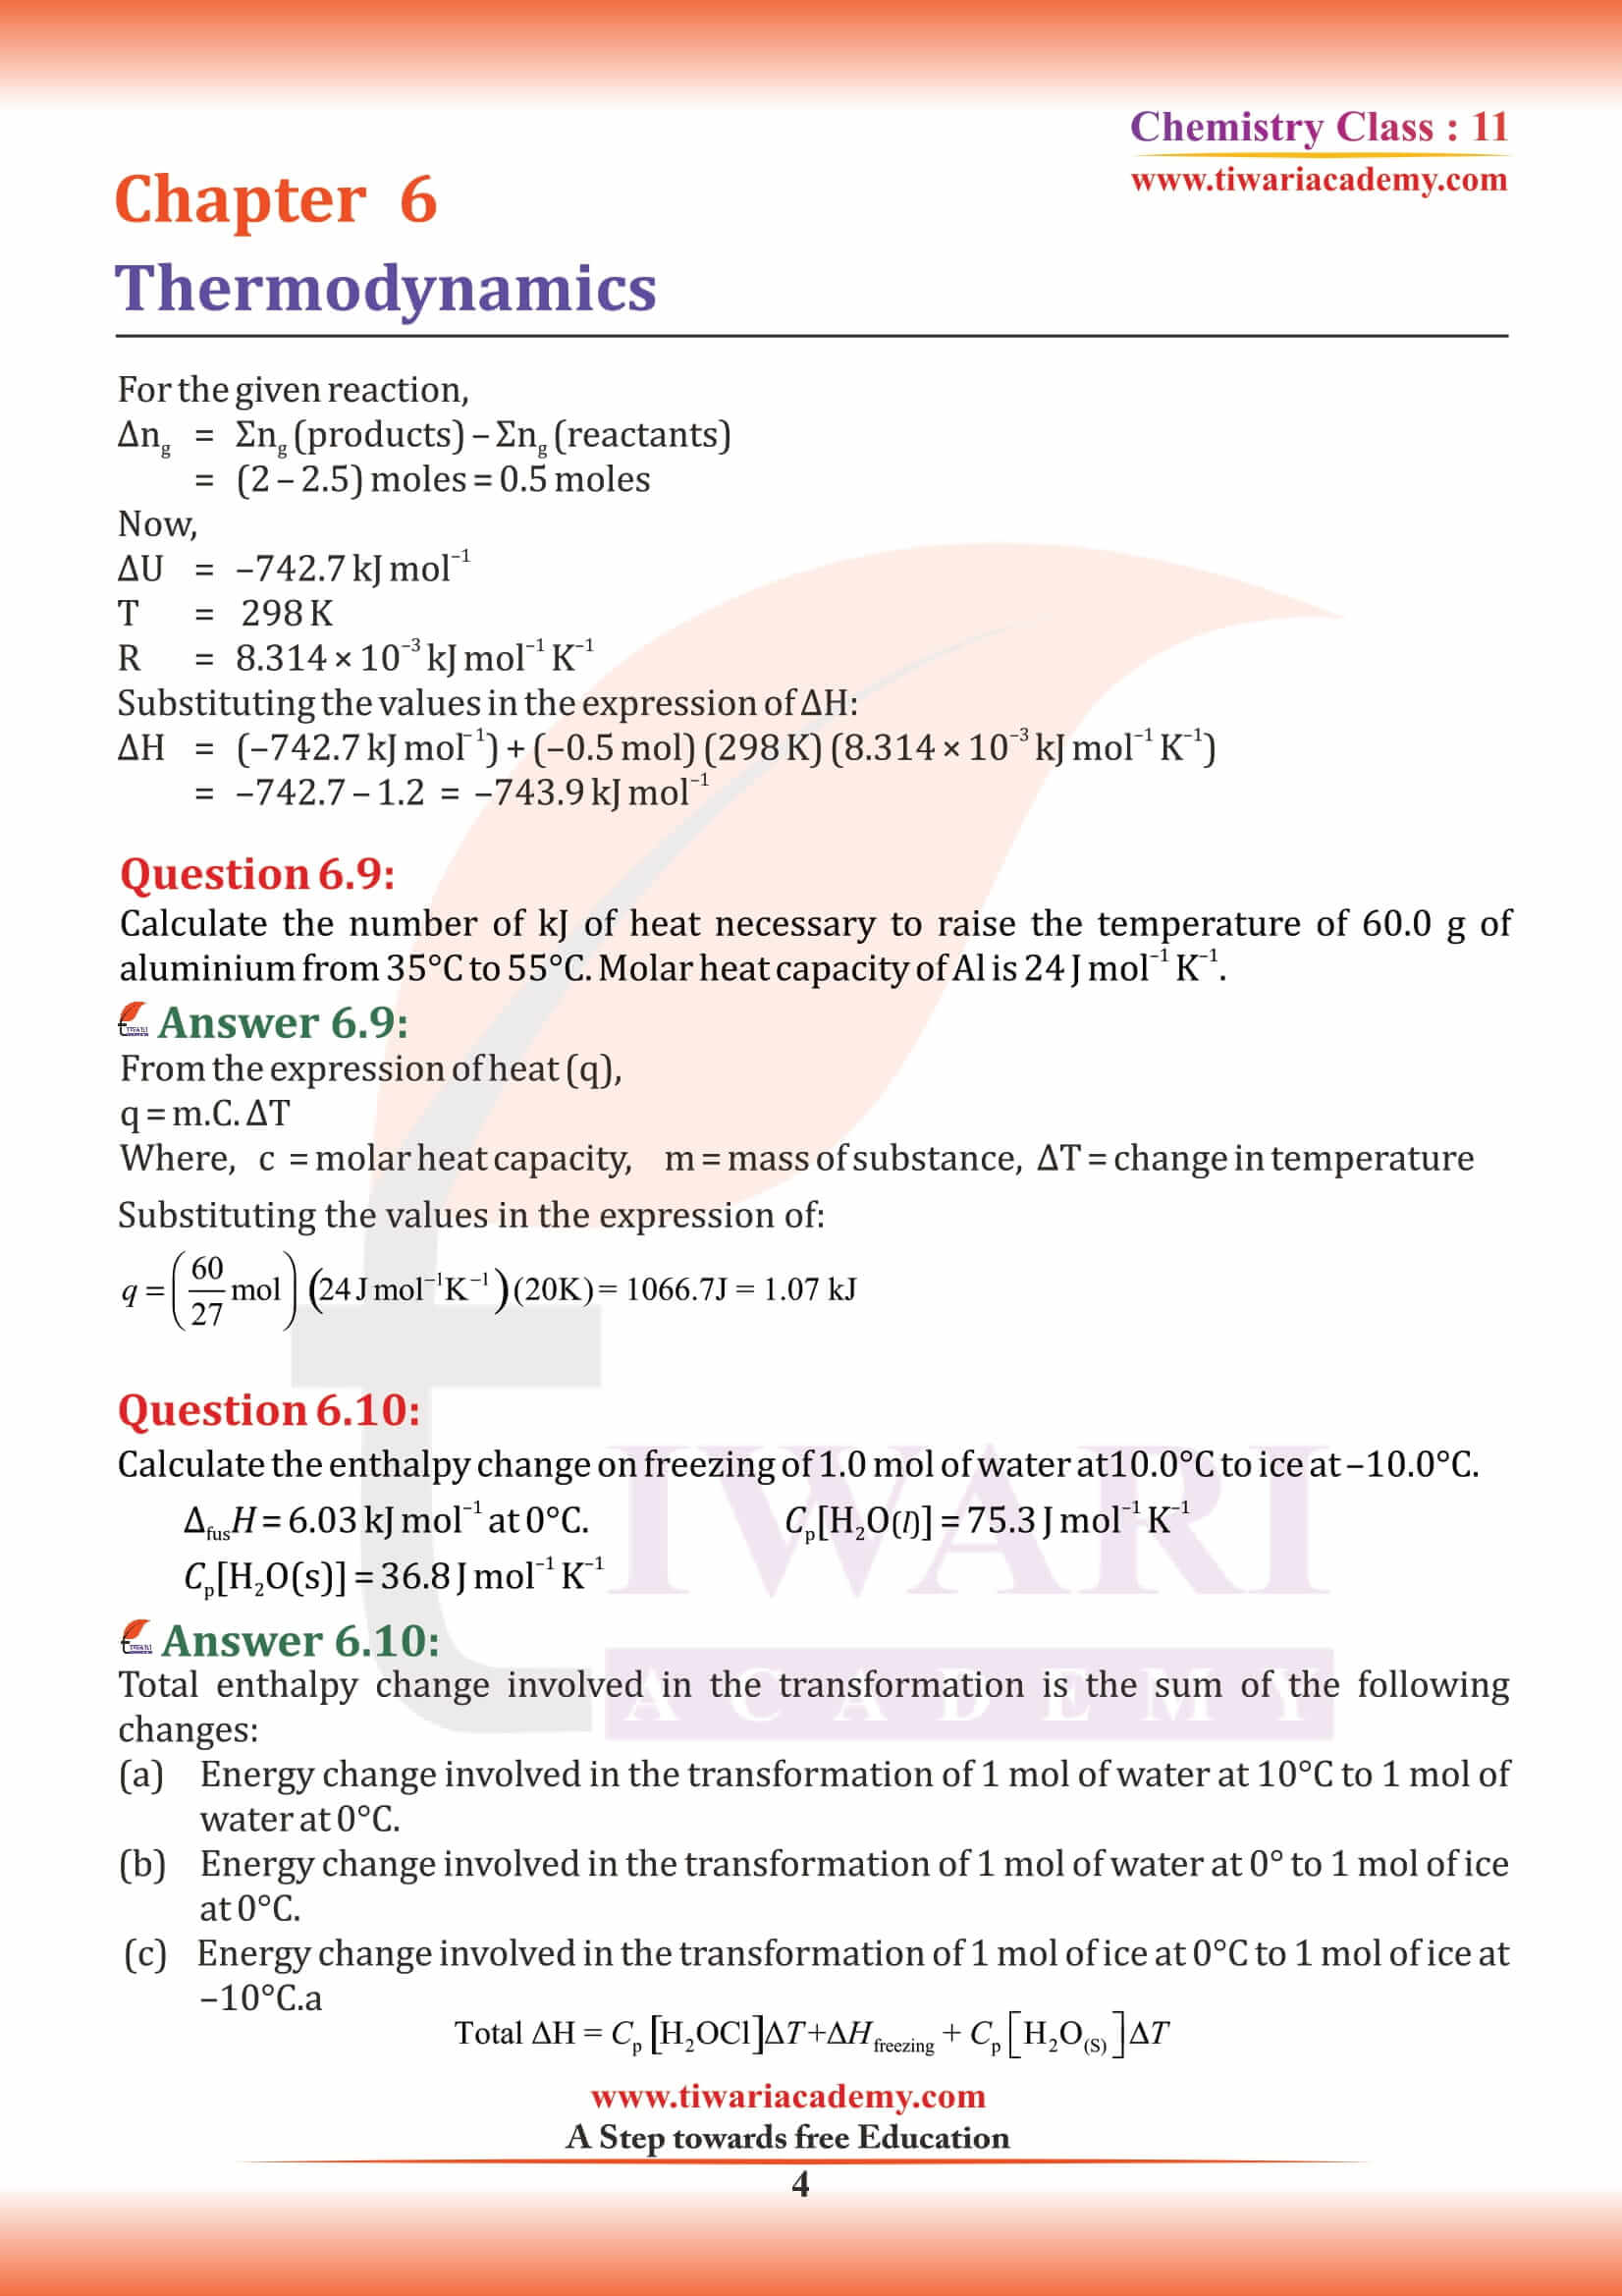 NCERT Solutions for Class 11 Chemistry Chapter 6 Intext exercises